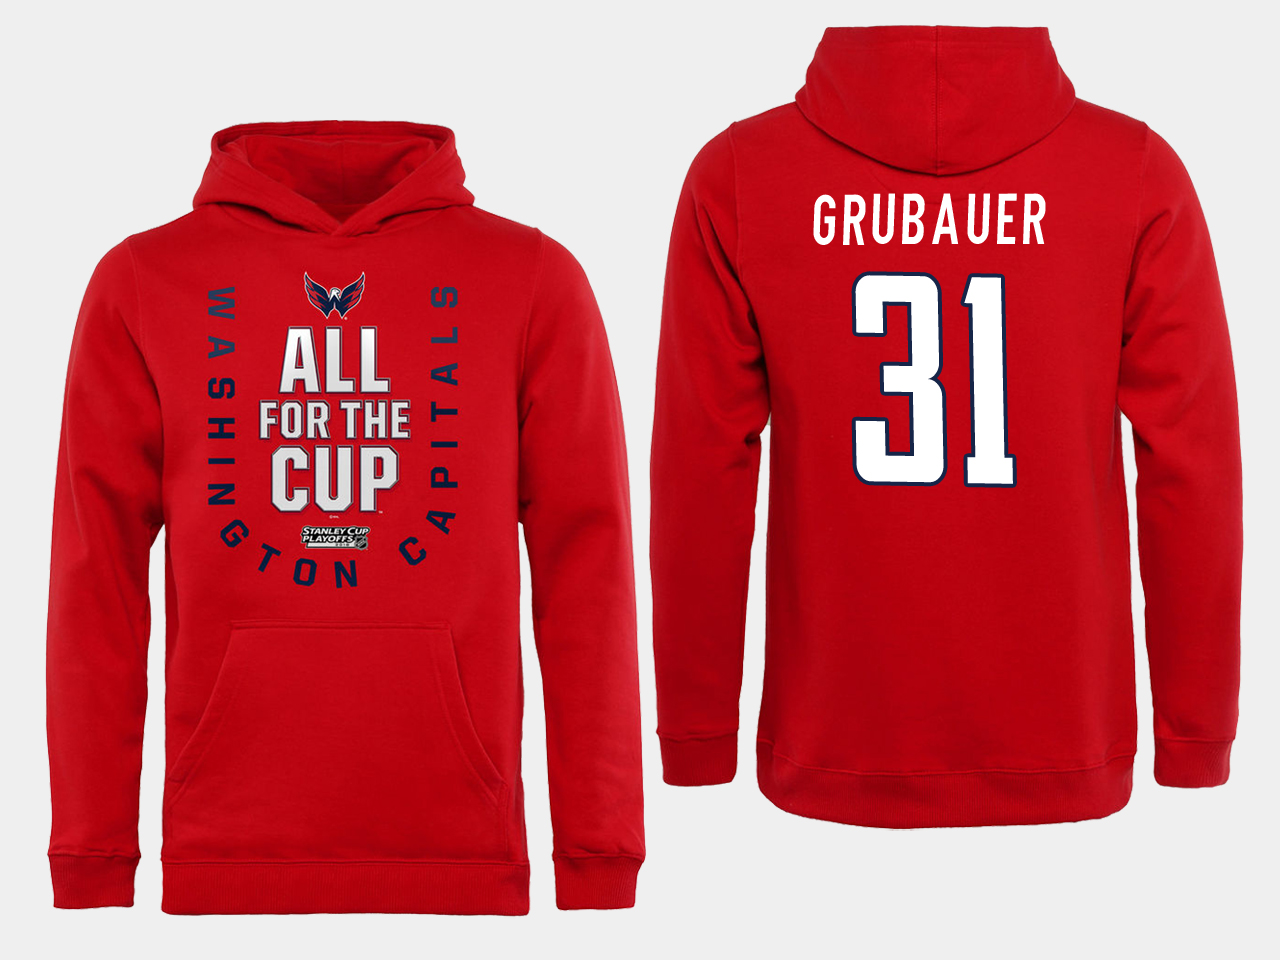 Men NHL Washington Capitals 31 grubauer Red All for the Cup Hoodie